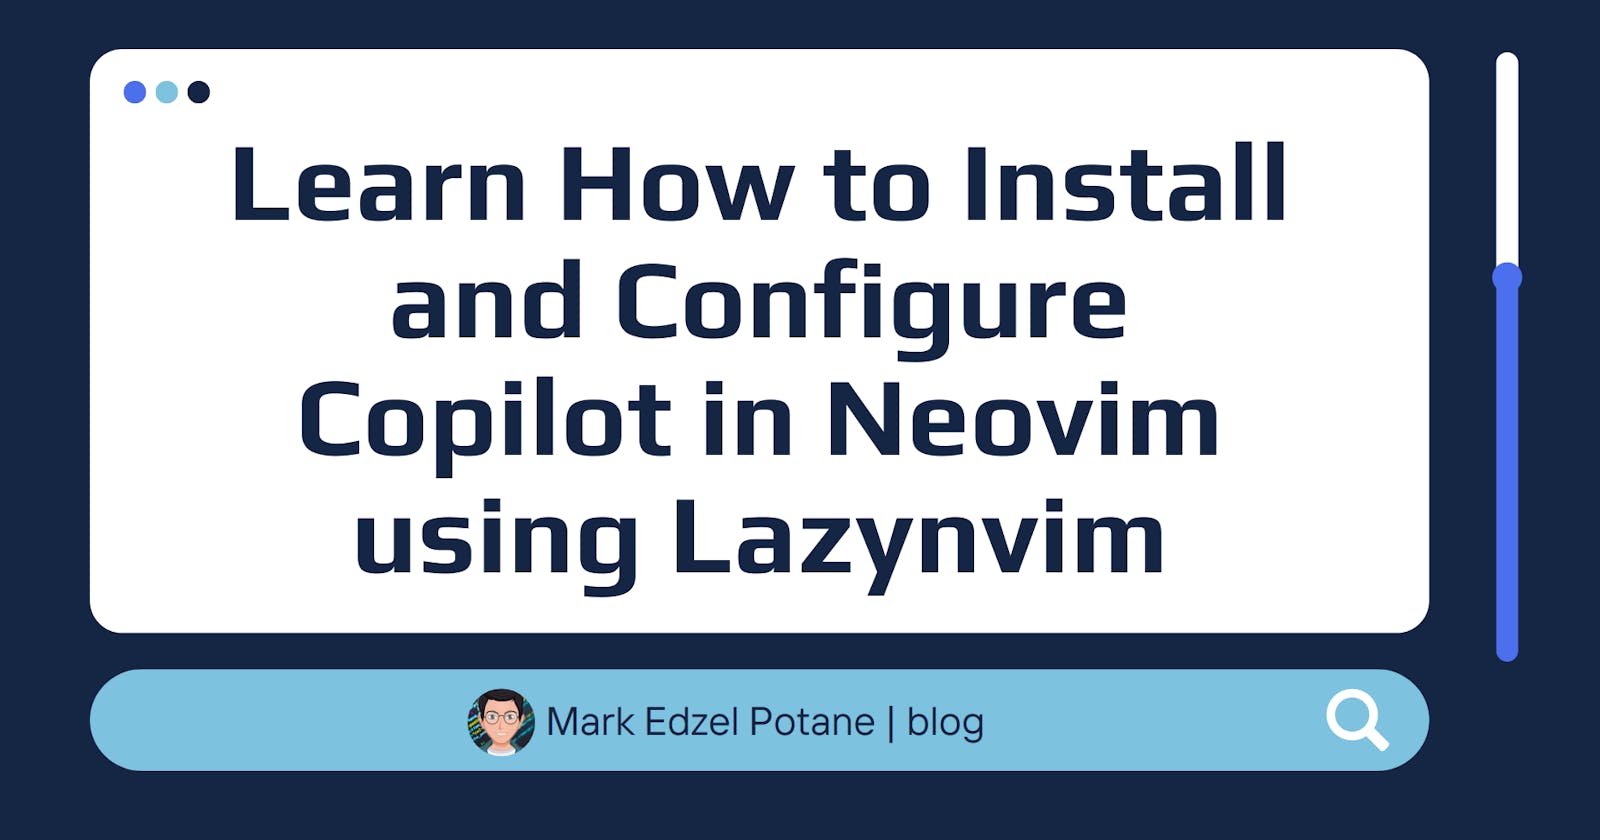 Learn How to Install and Configure Copilot in Neovim using Lazynvim